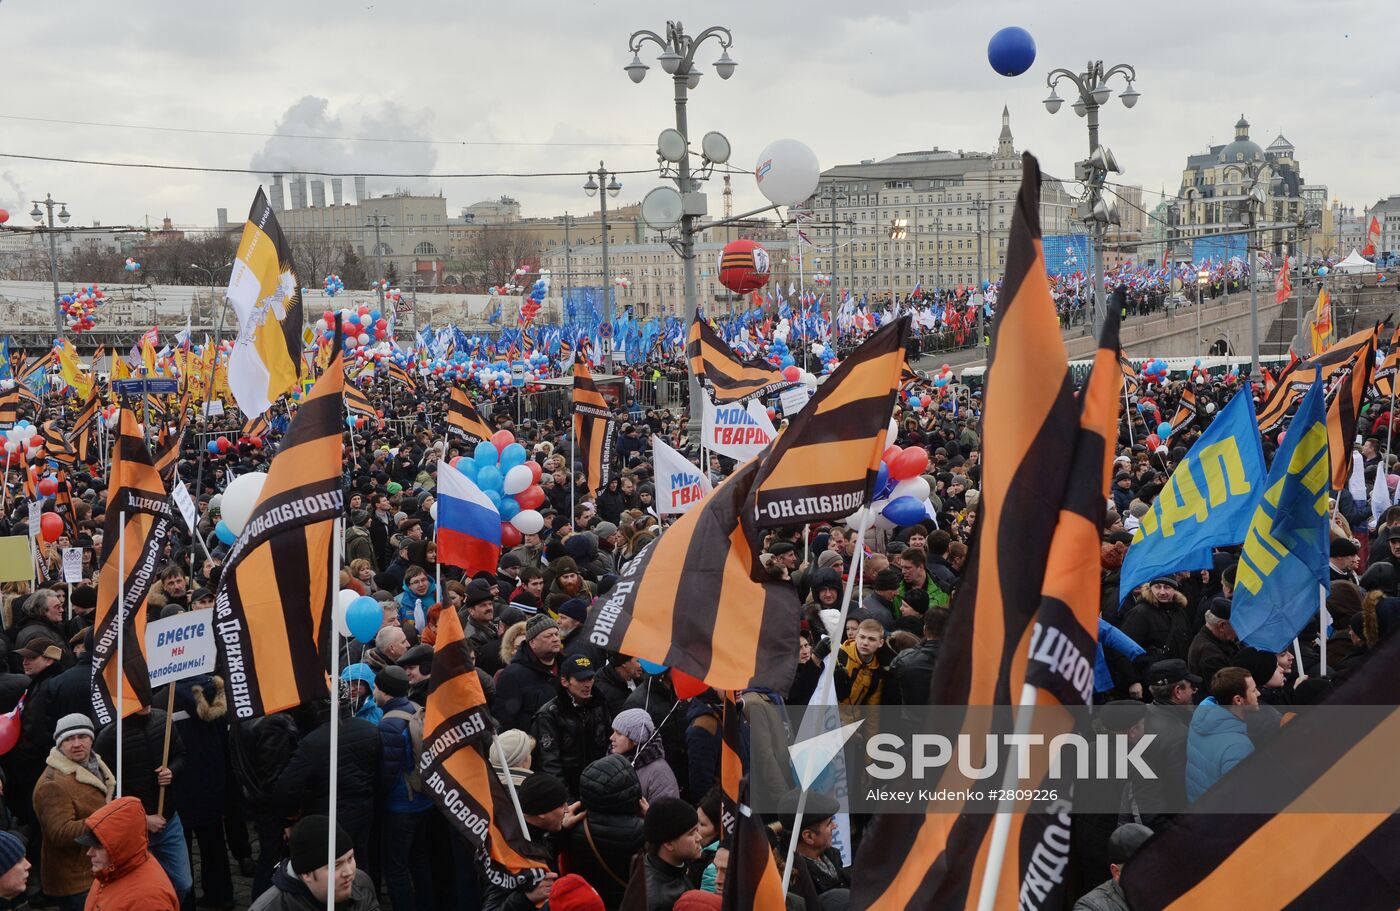 "We Are Together" rally and concert at Vasilyevsky Spusk